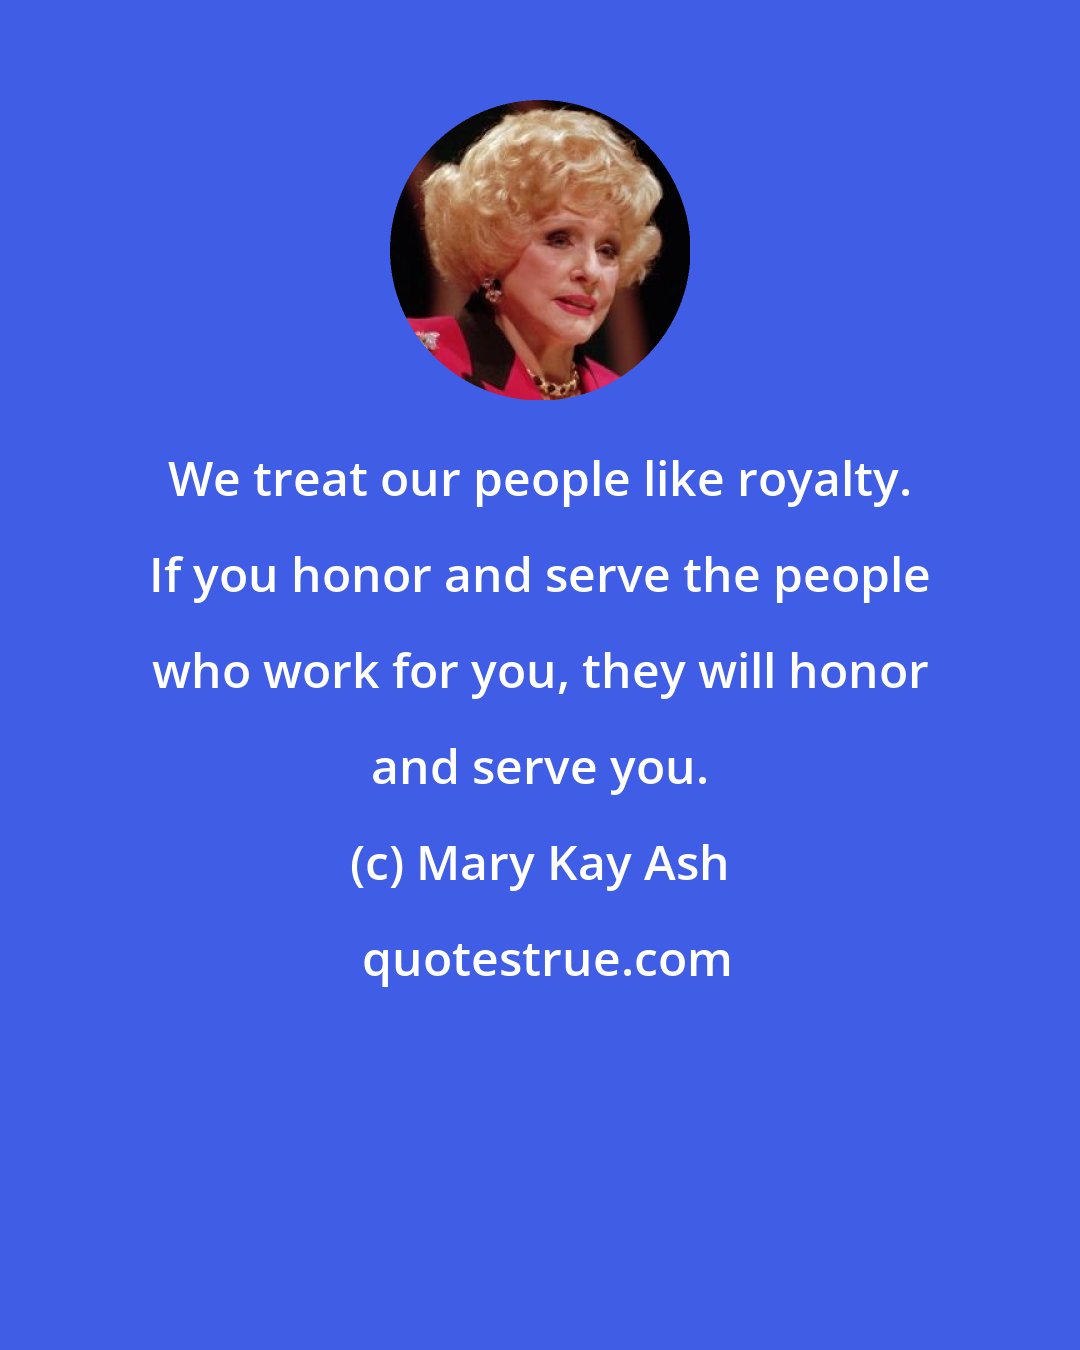 Mary Kay Ash: We treat our people like royalty. If you honor and serve the people who work for you, they will honor and serve you.